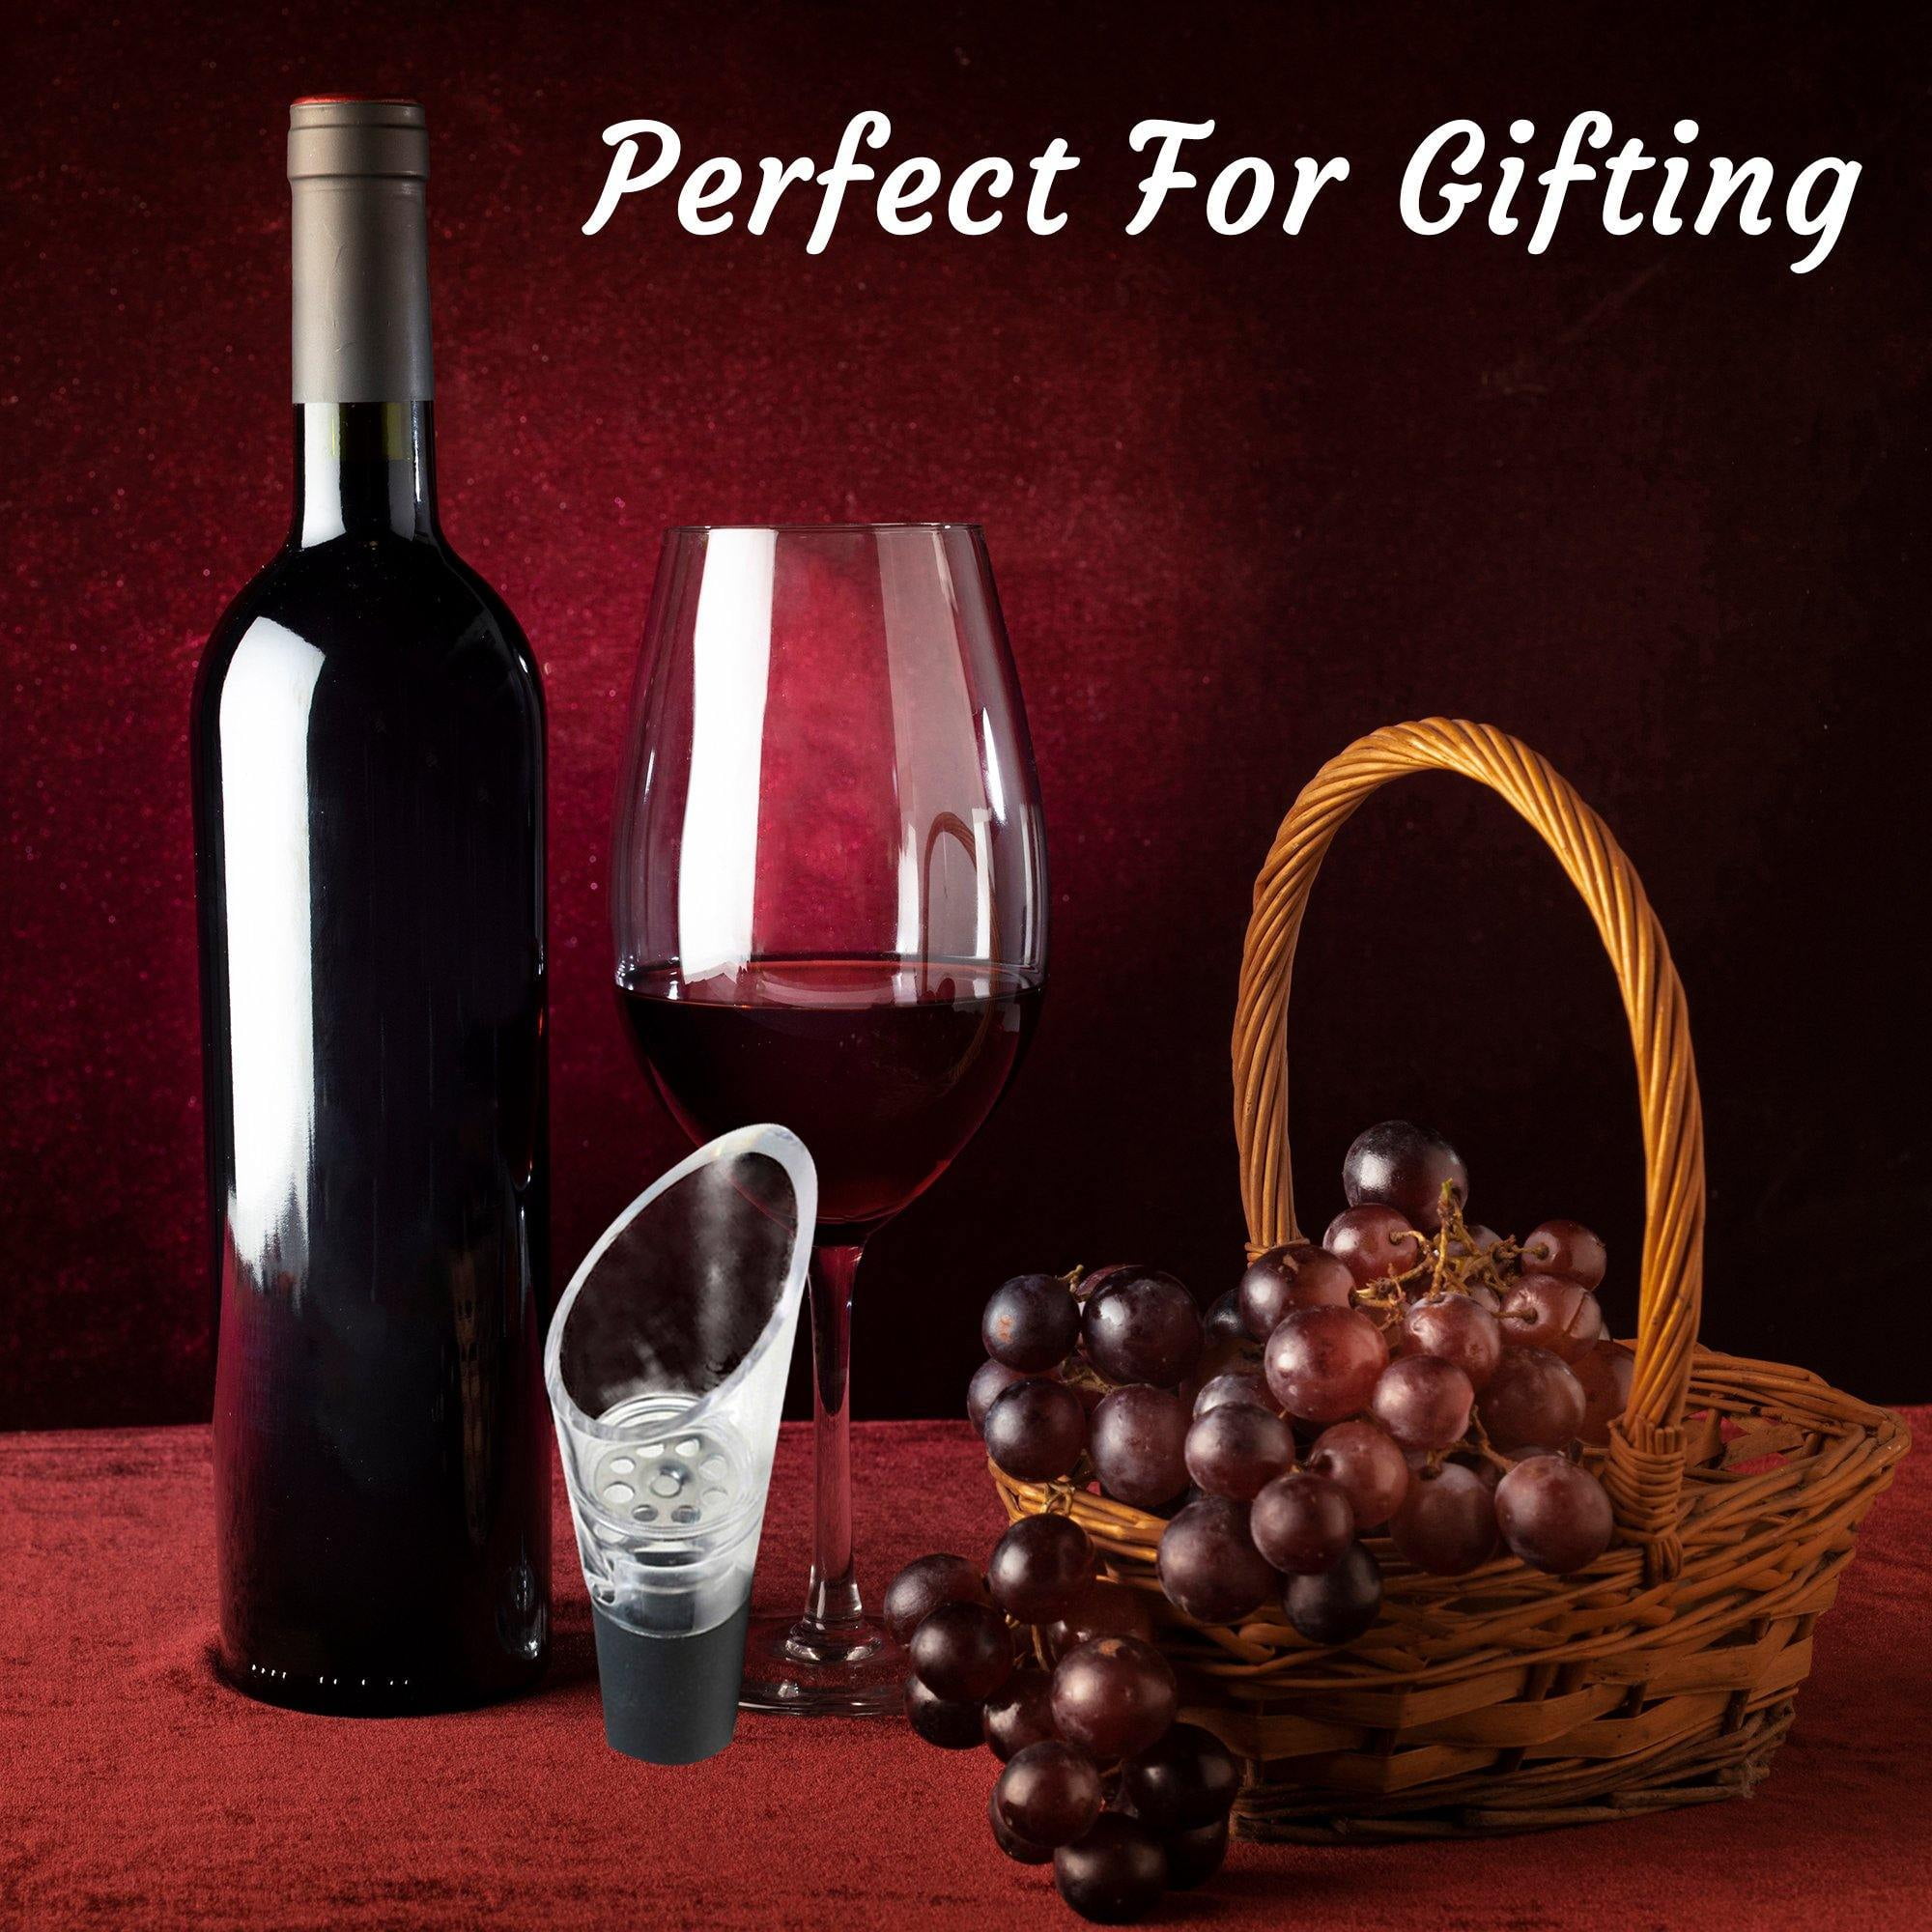 2-in-1 Diffuser Oxygenator and Pouring Dispe Trovety Wine Aerator Pourer Spout 